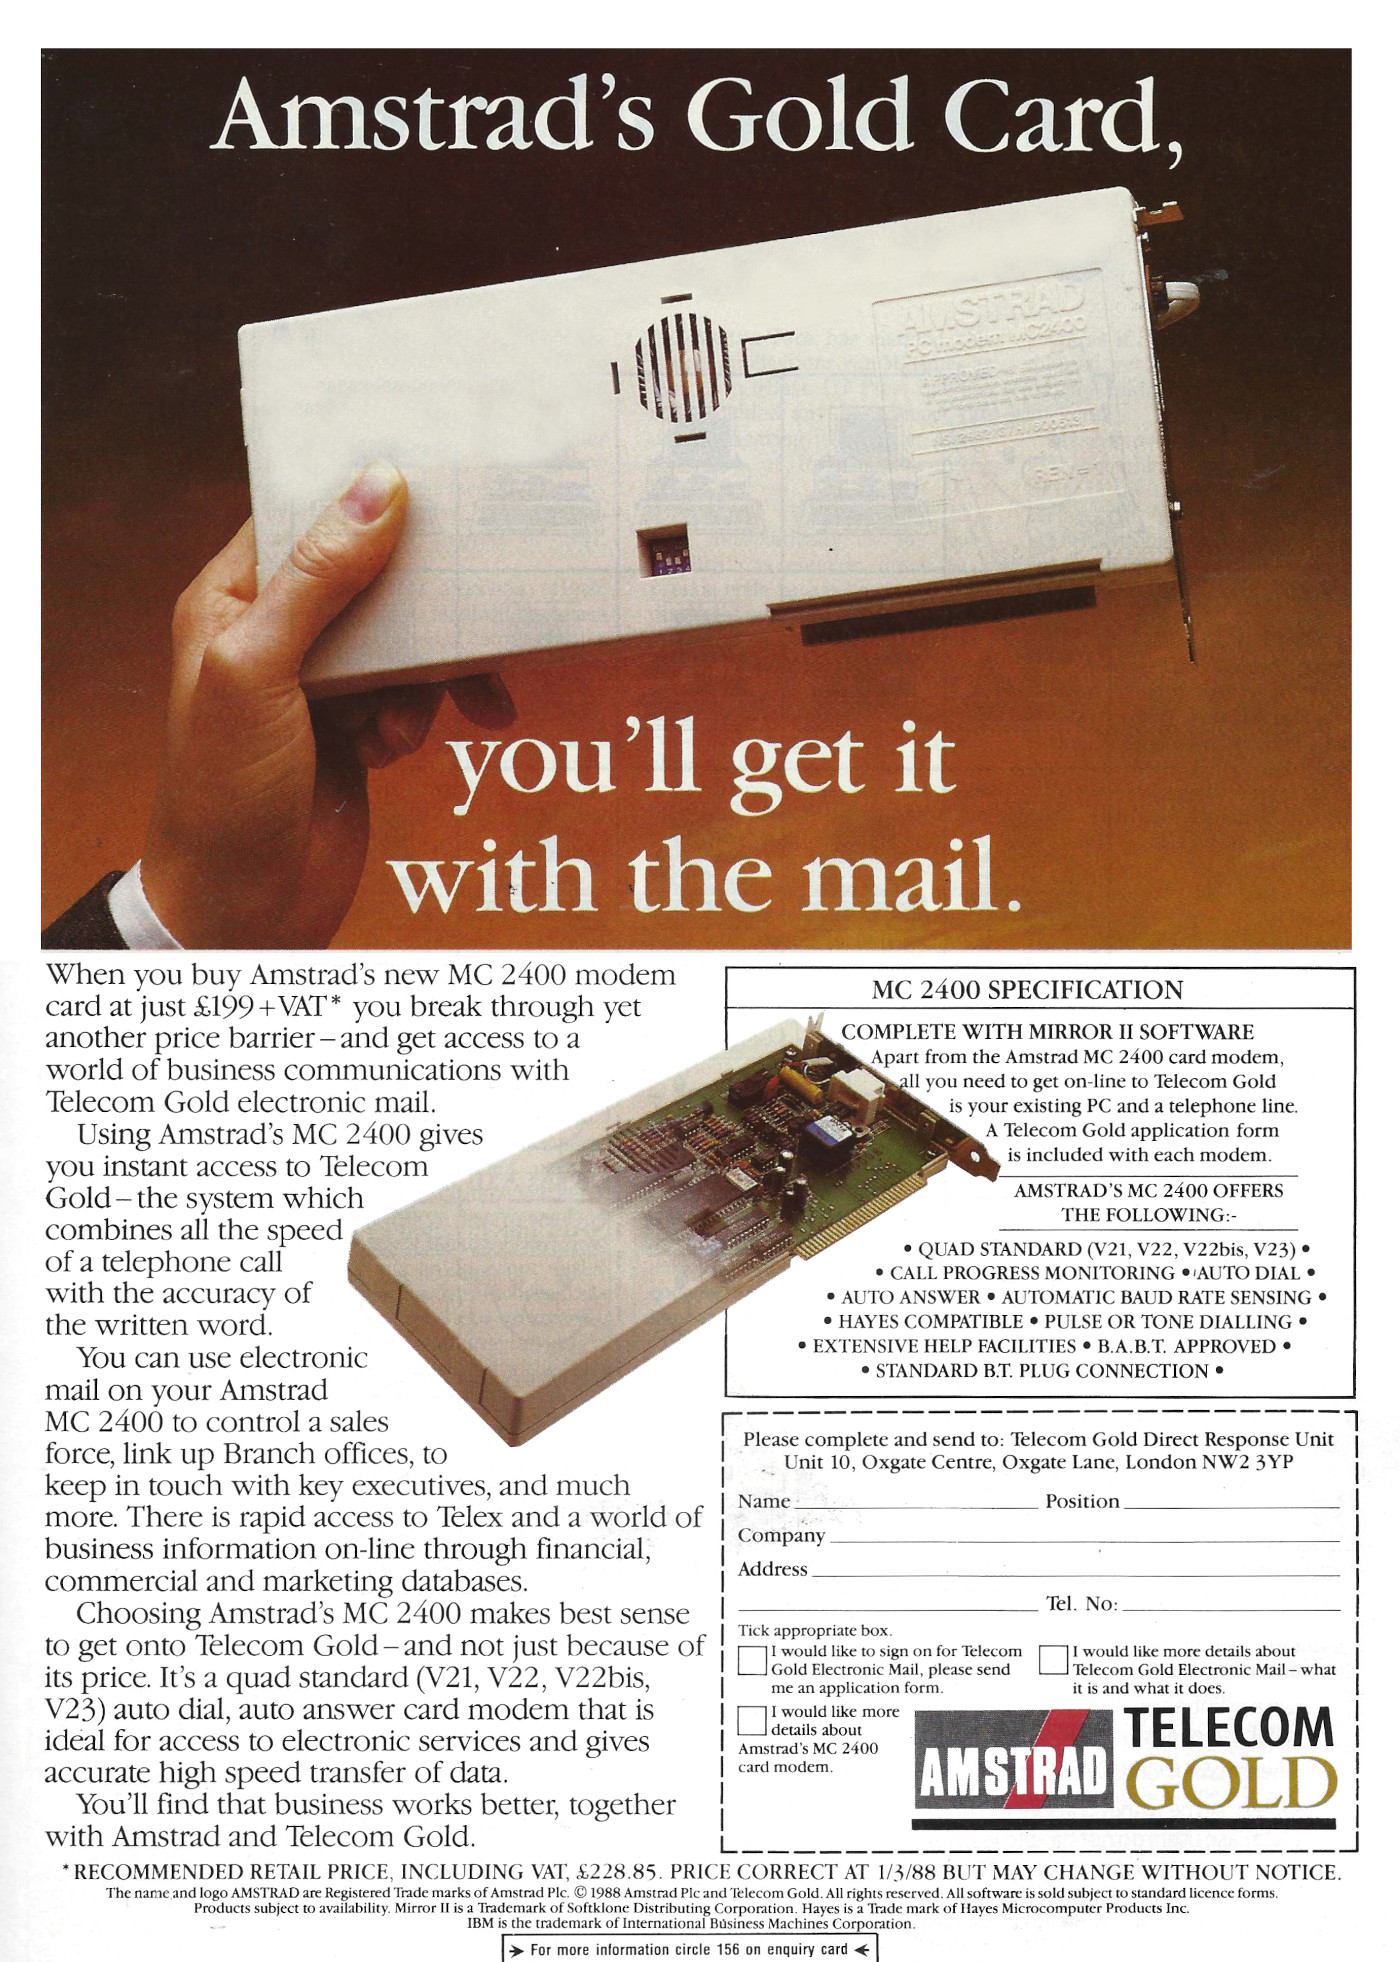 Amstrad's MC2<span class='hilite'><span class='hilite'><span class='hilite'>400</span></span></span> modem for £199 + VAT, a groundbreaking price for a modem at the time. From Practical Computing, April 1988